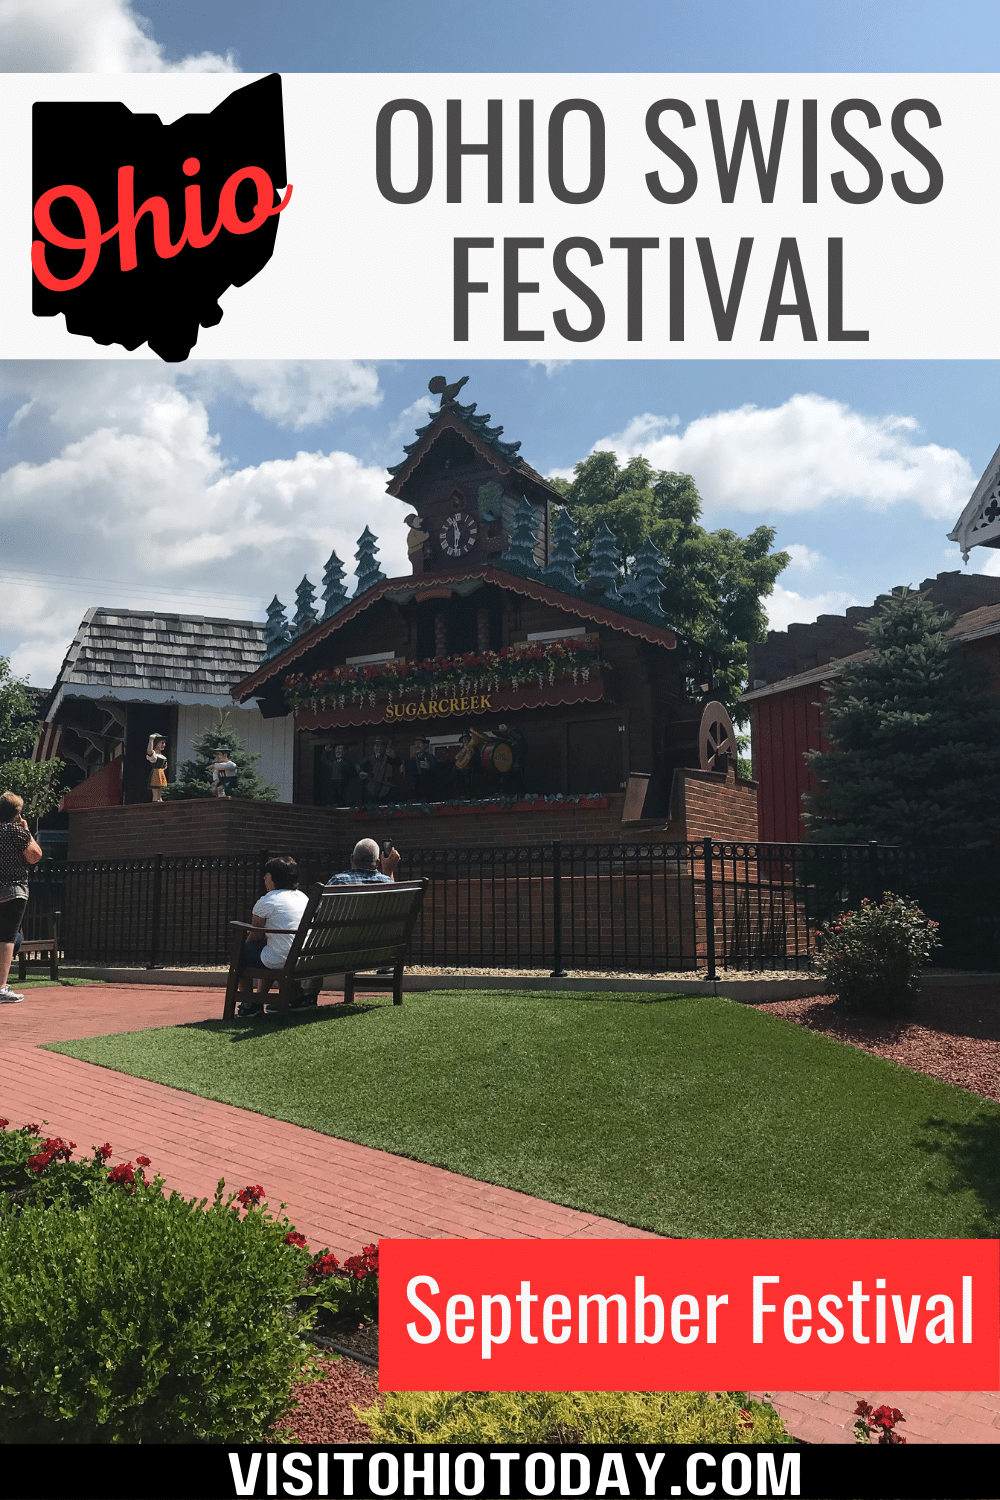 Immerse in Sugarcreek's lively Ohio Swiss Festival, celebrating Switzerland's rich heritage with wine, cheese, races, contests, parades, music, food, and fun for all!